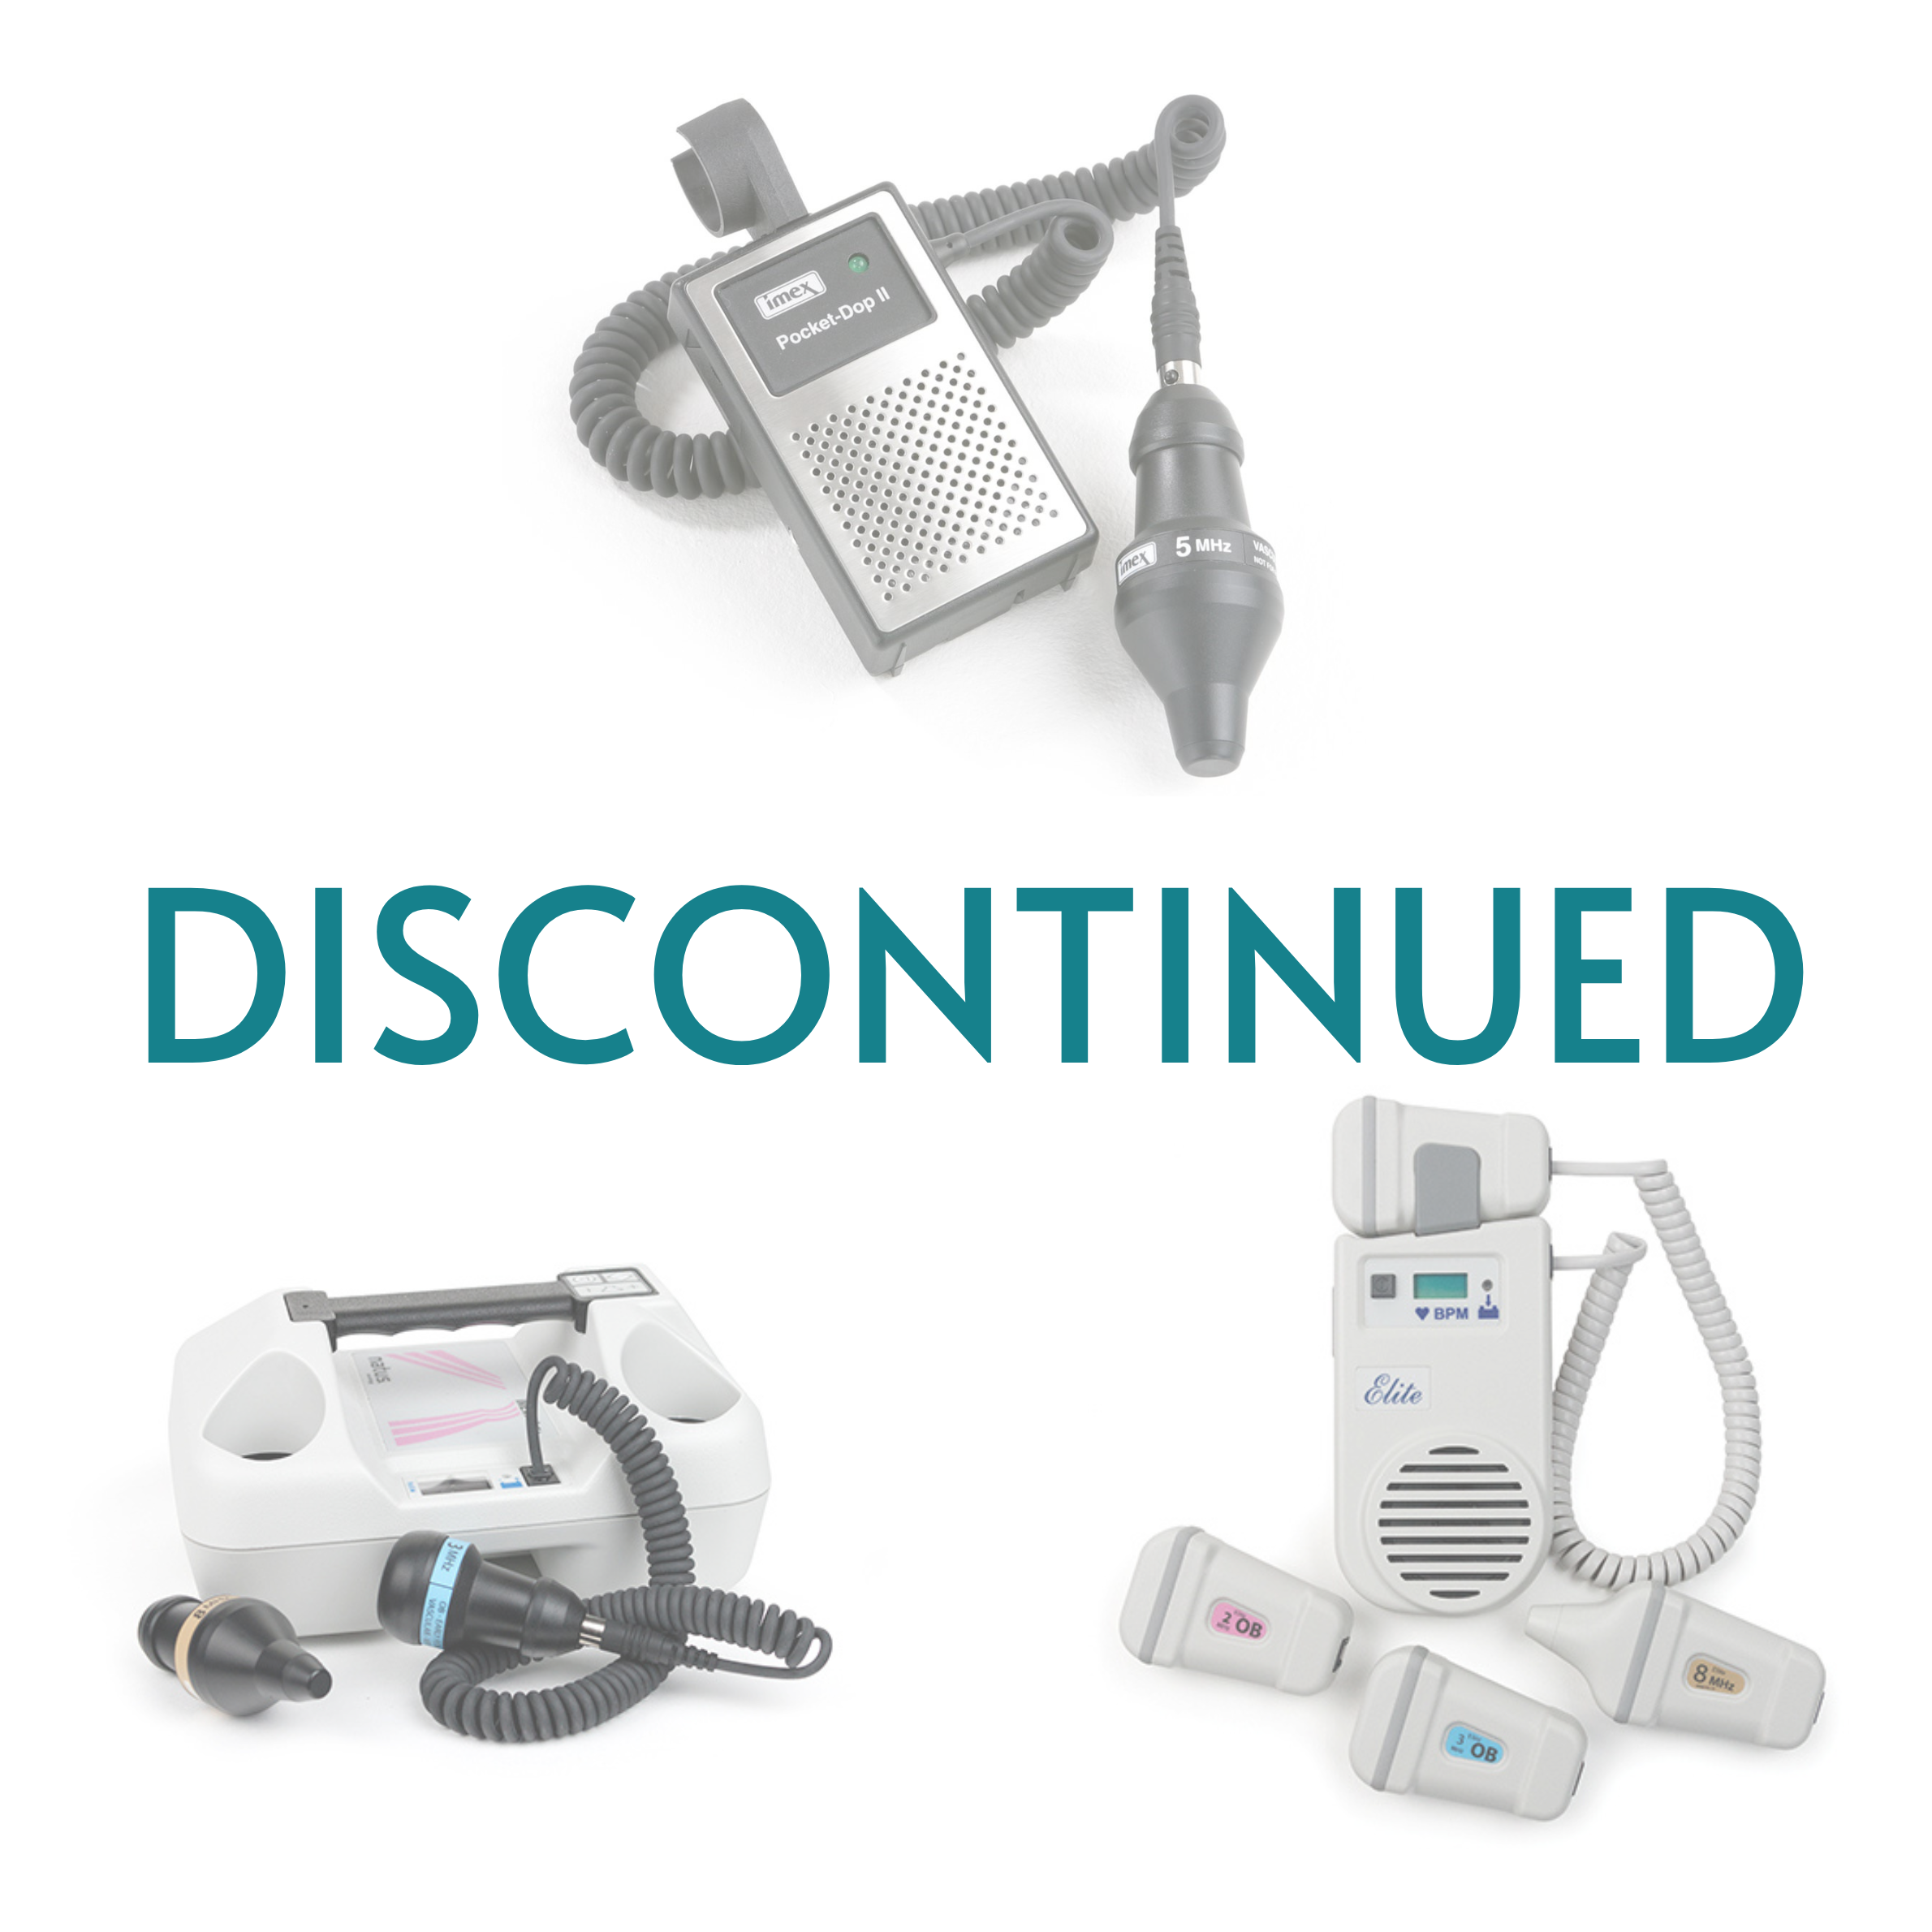 Best Alternative to Discontinued Natus Dopplers